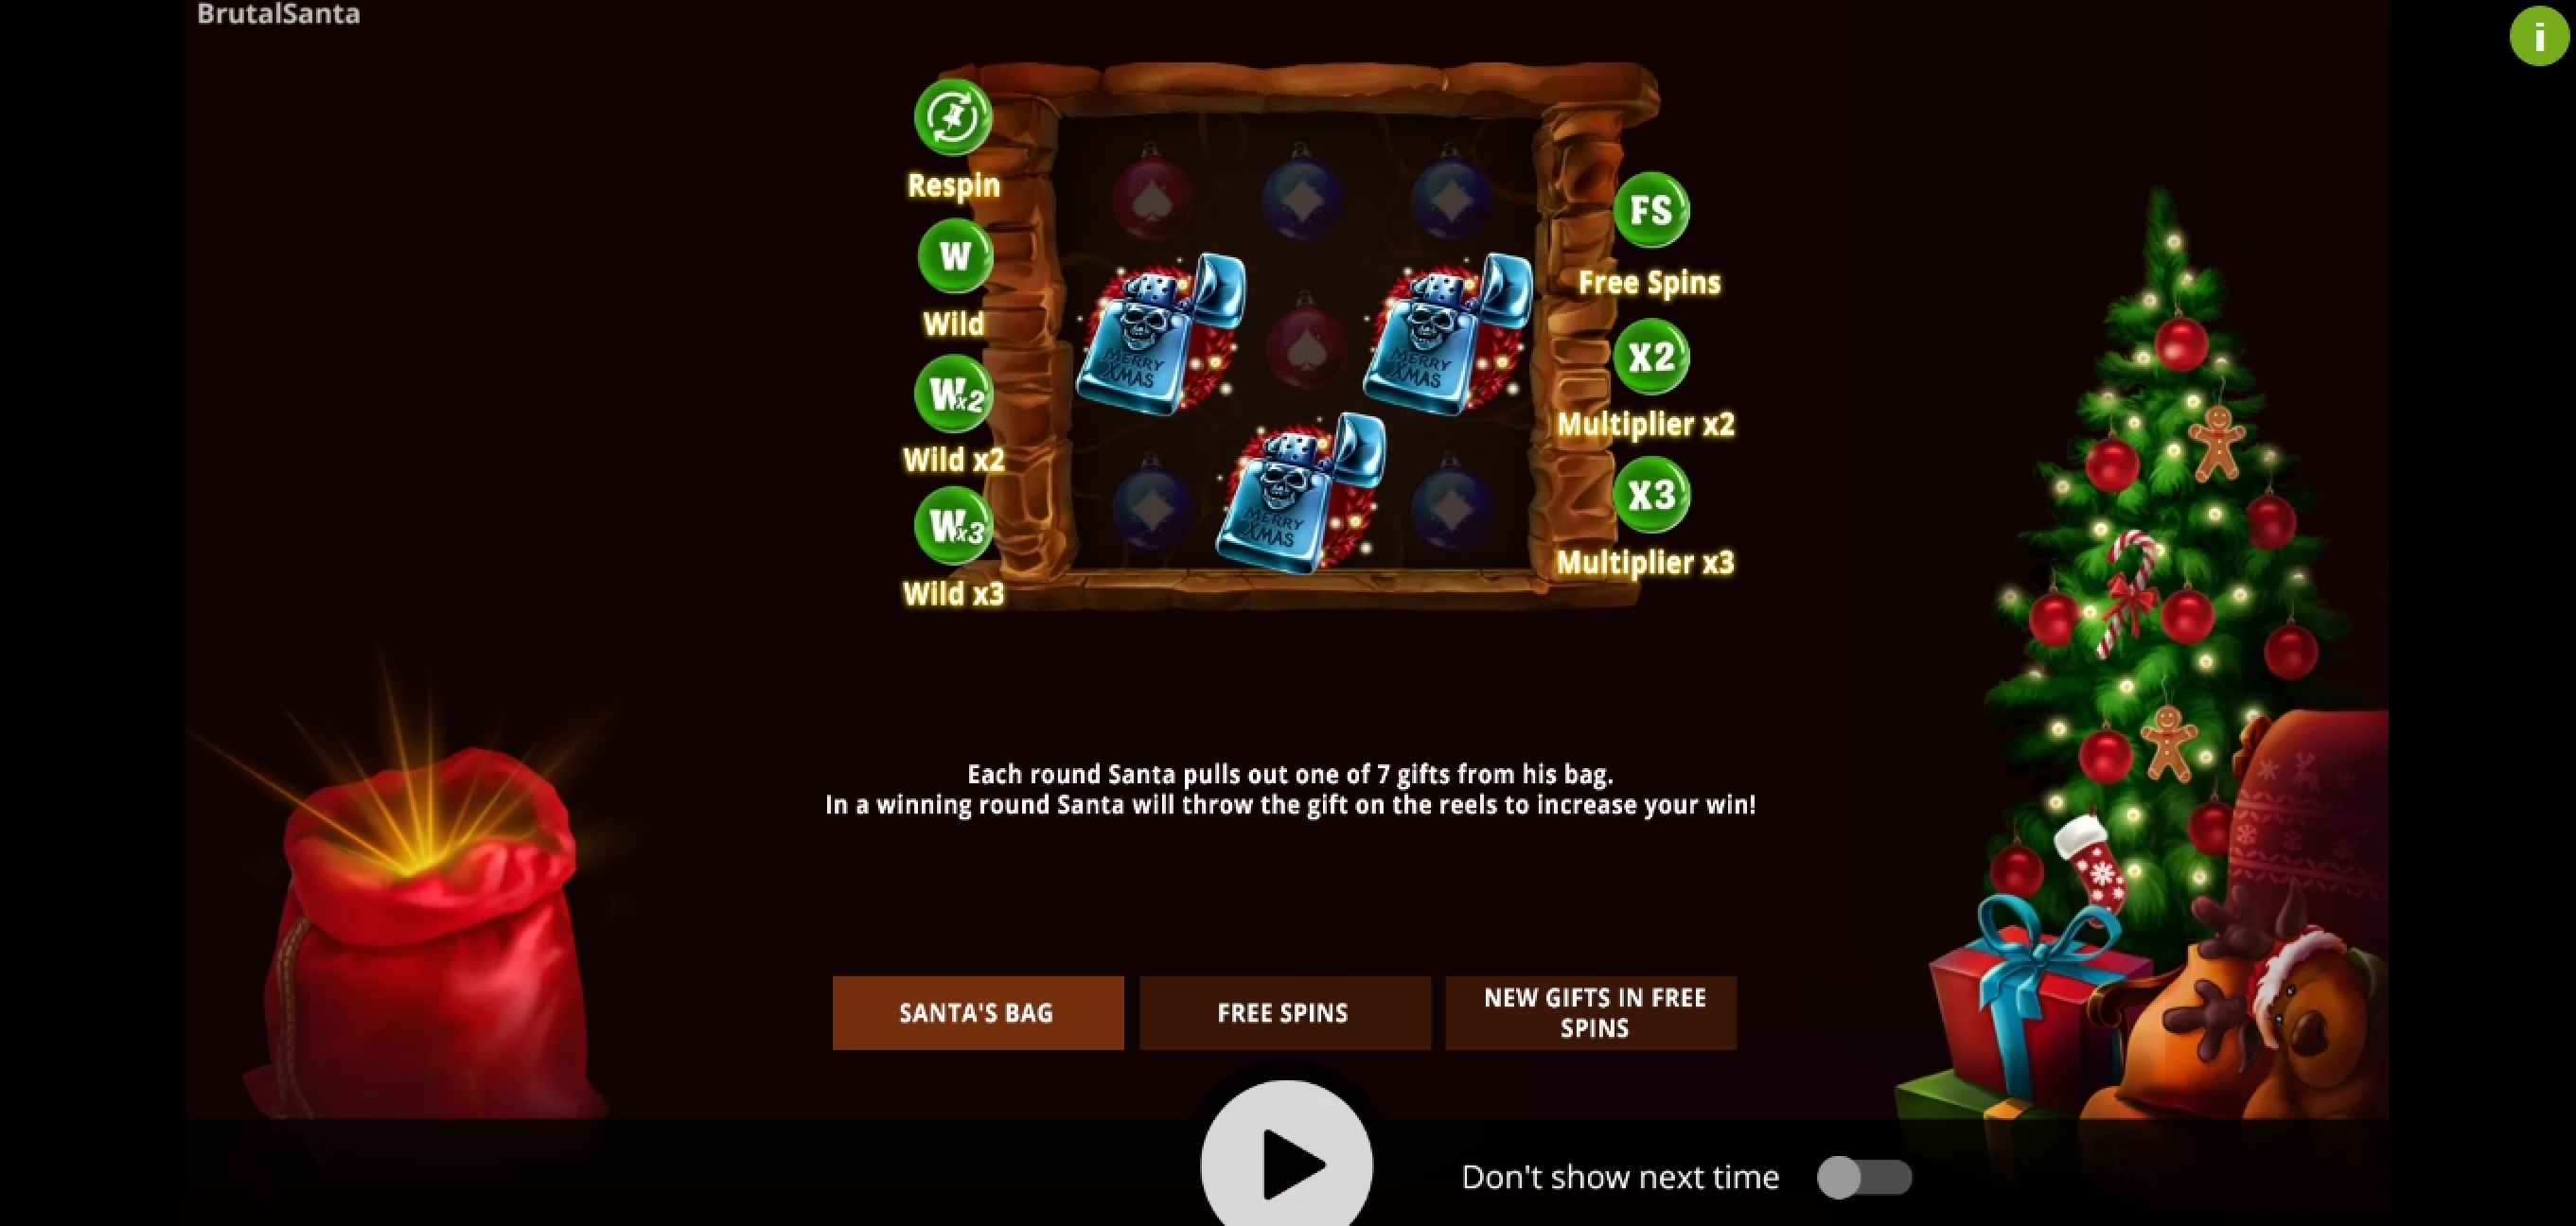 Play Brutal Santa Free Casino Slot Game by Evoplay Entertainment